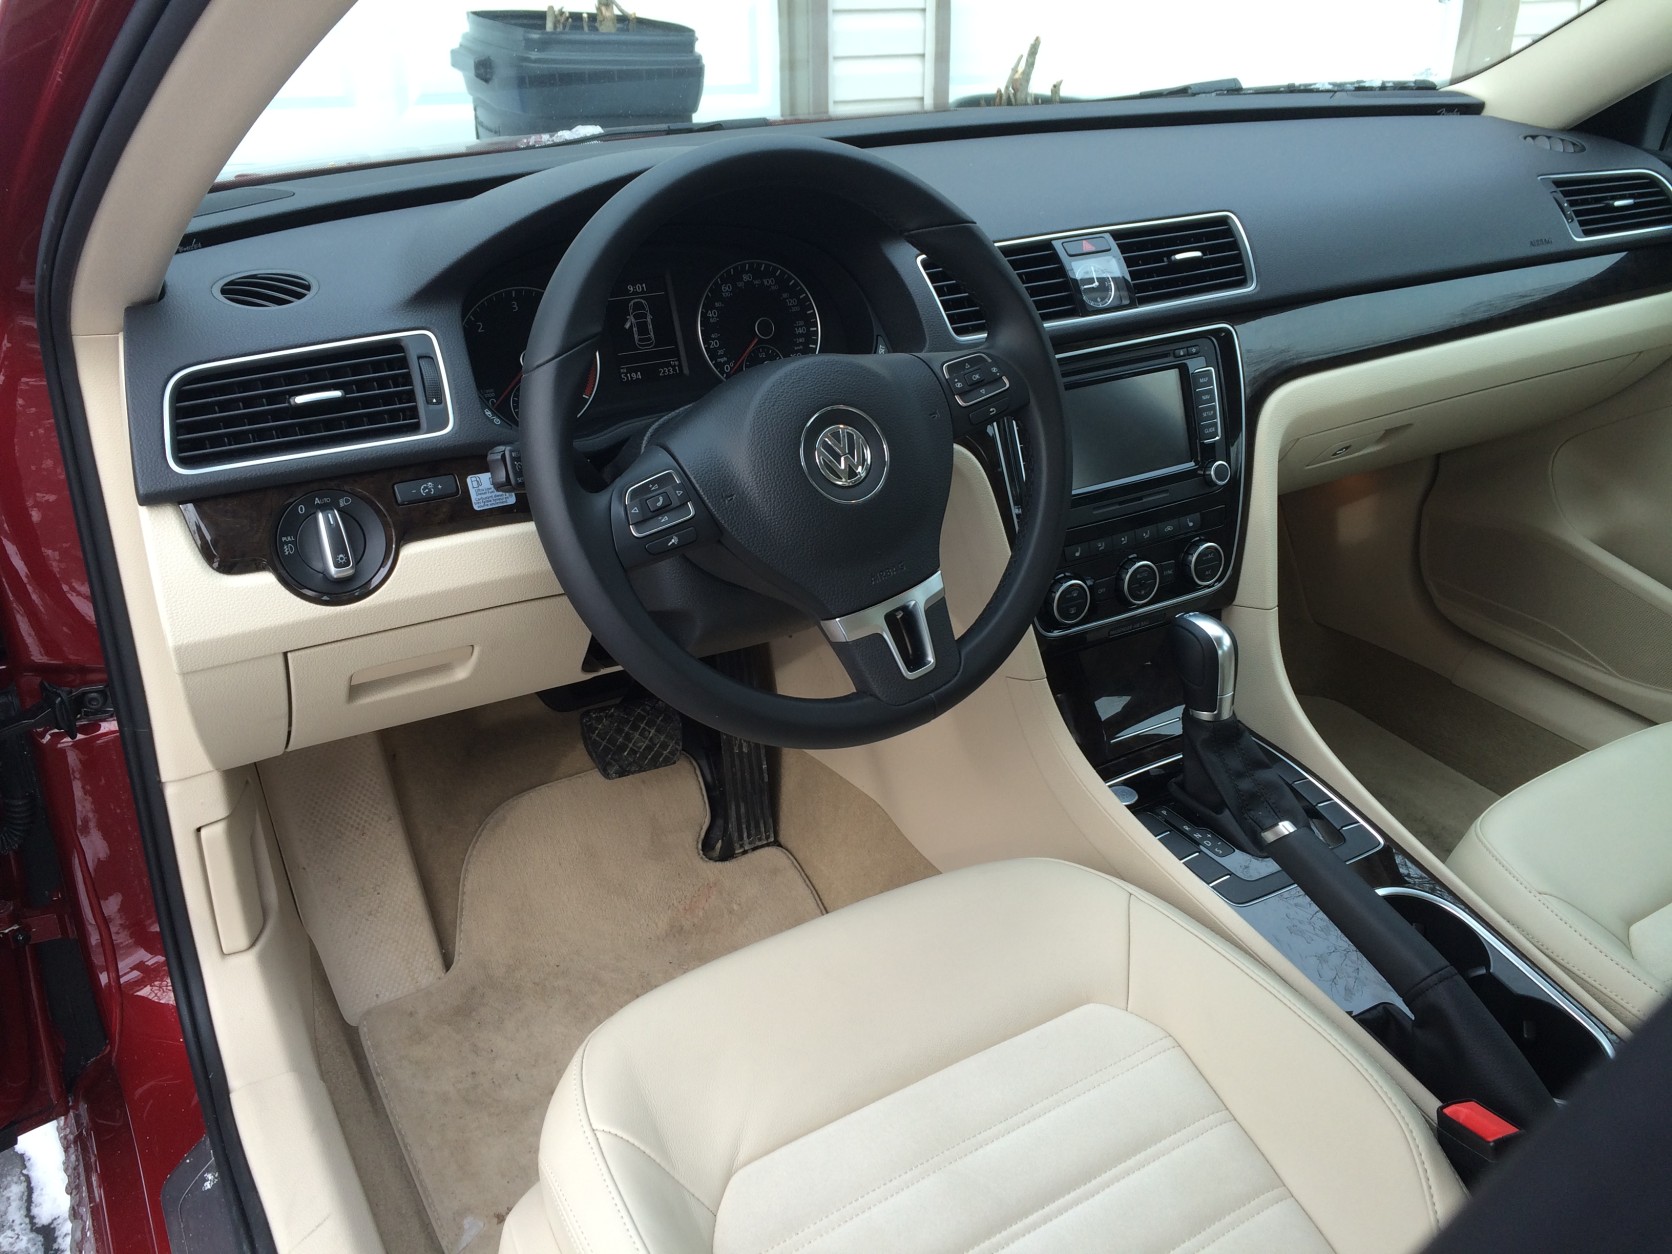 2015 Passat TDI: A sedan with the fuel economy of a compact WTOP News